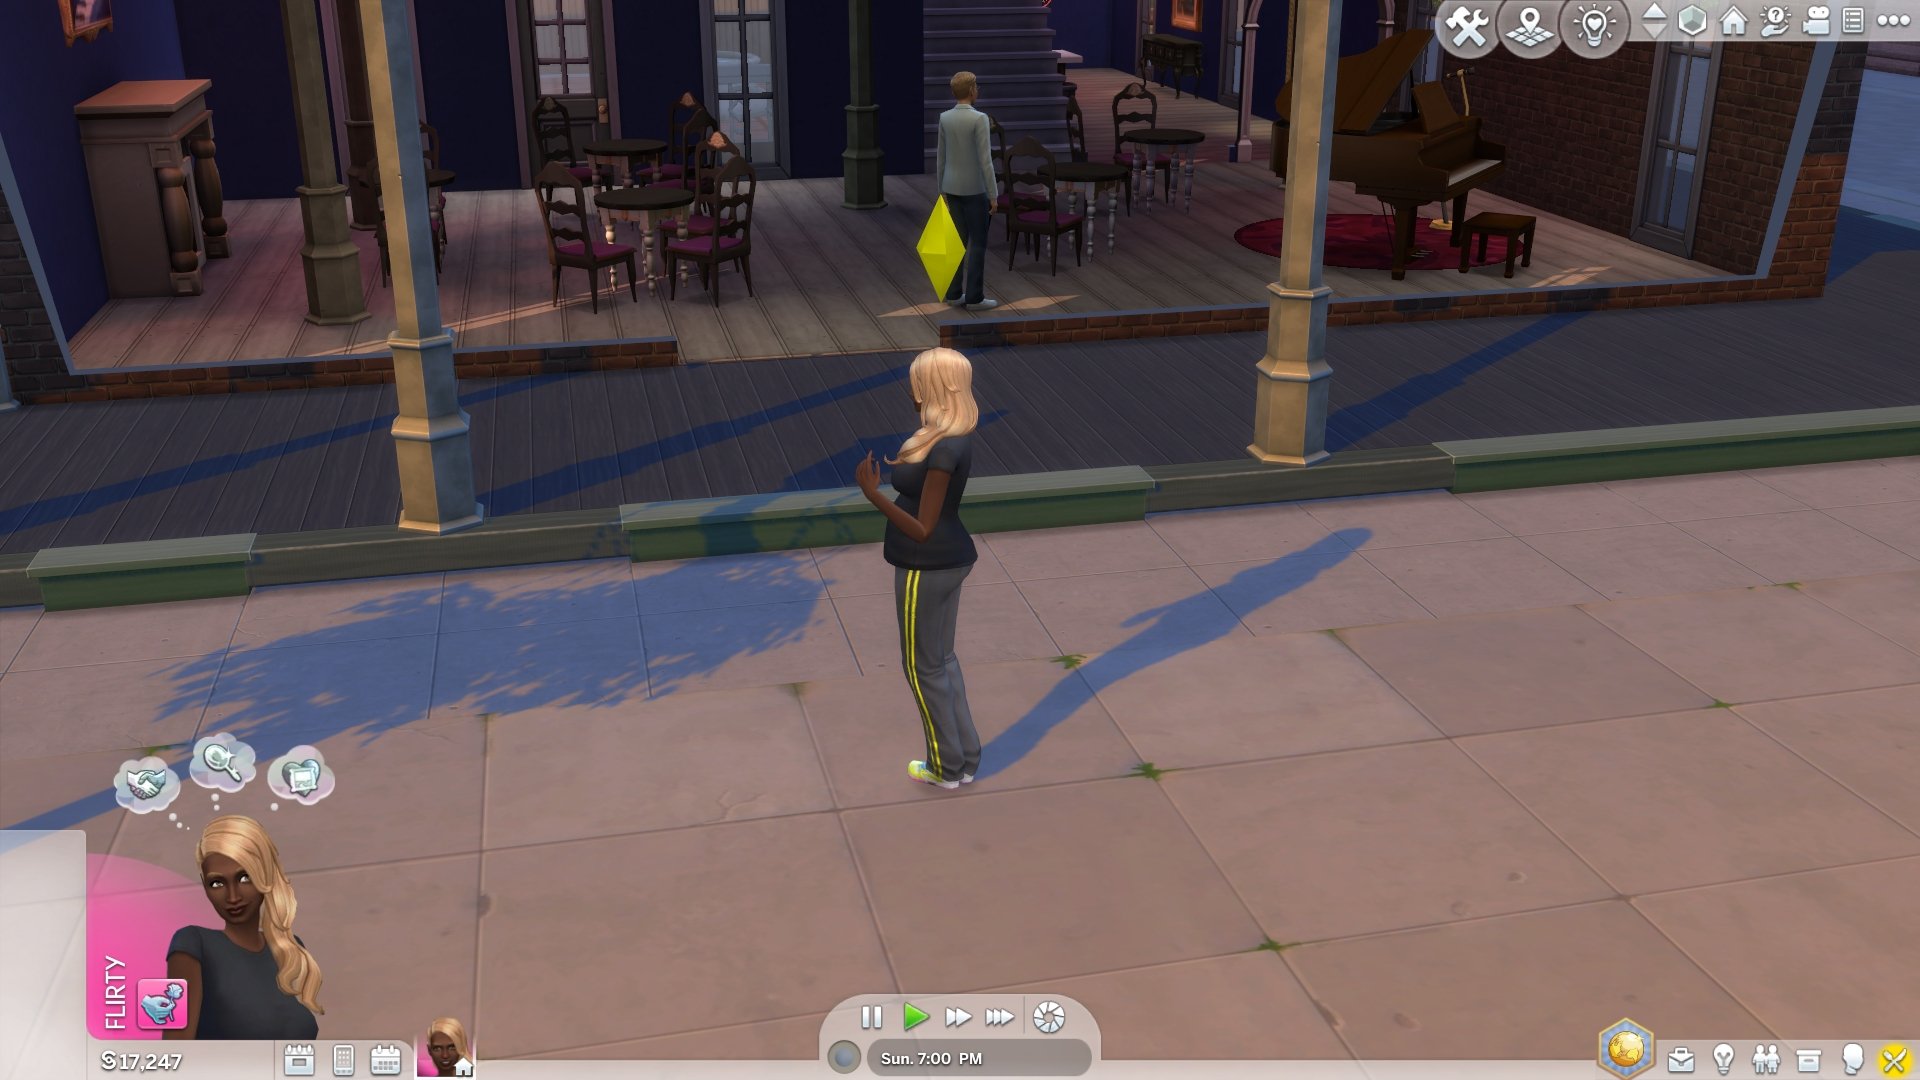 sims 4 demo for pc